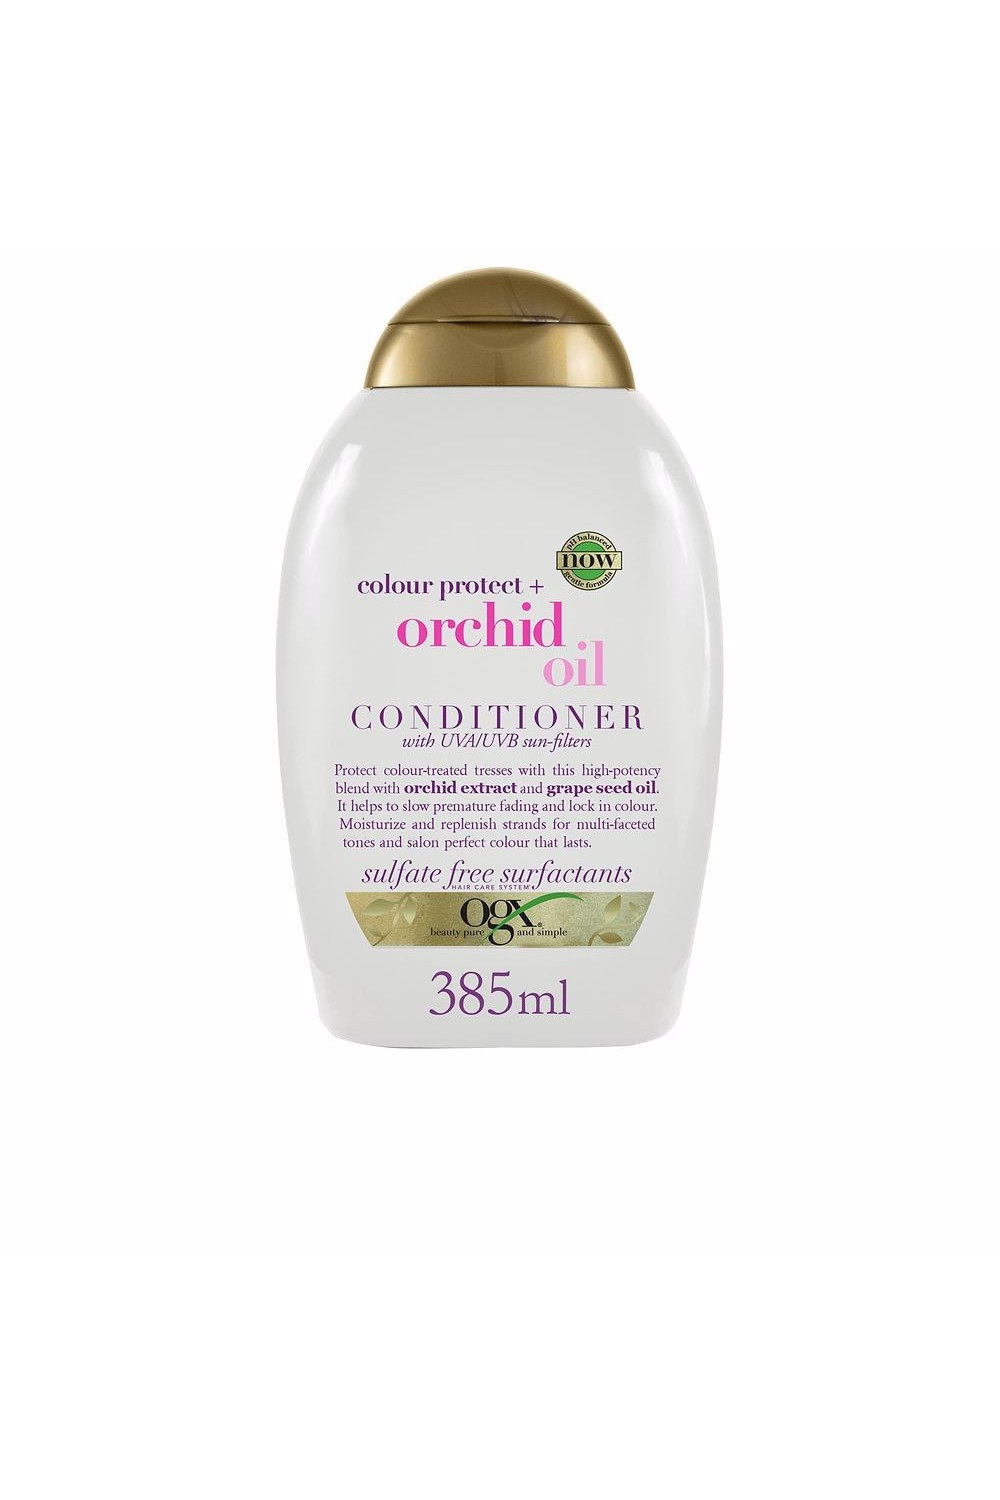 Ogx Orchid Oil Fade-Defying Hair Conditioner 385ml